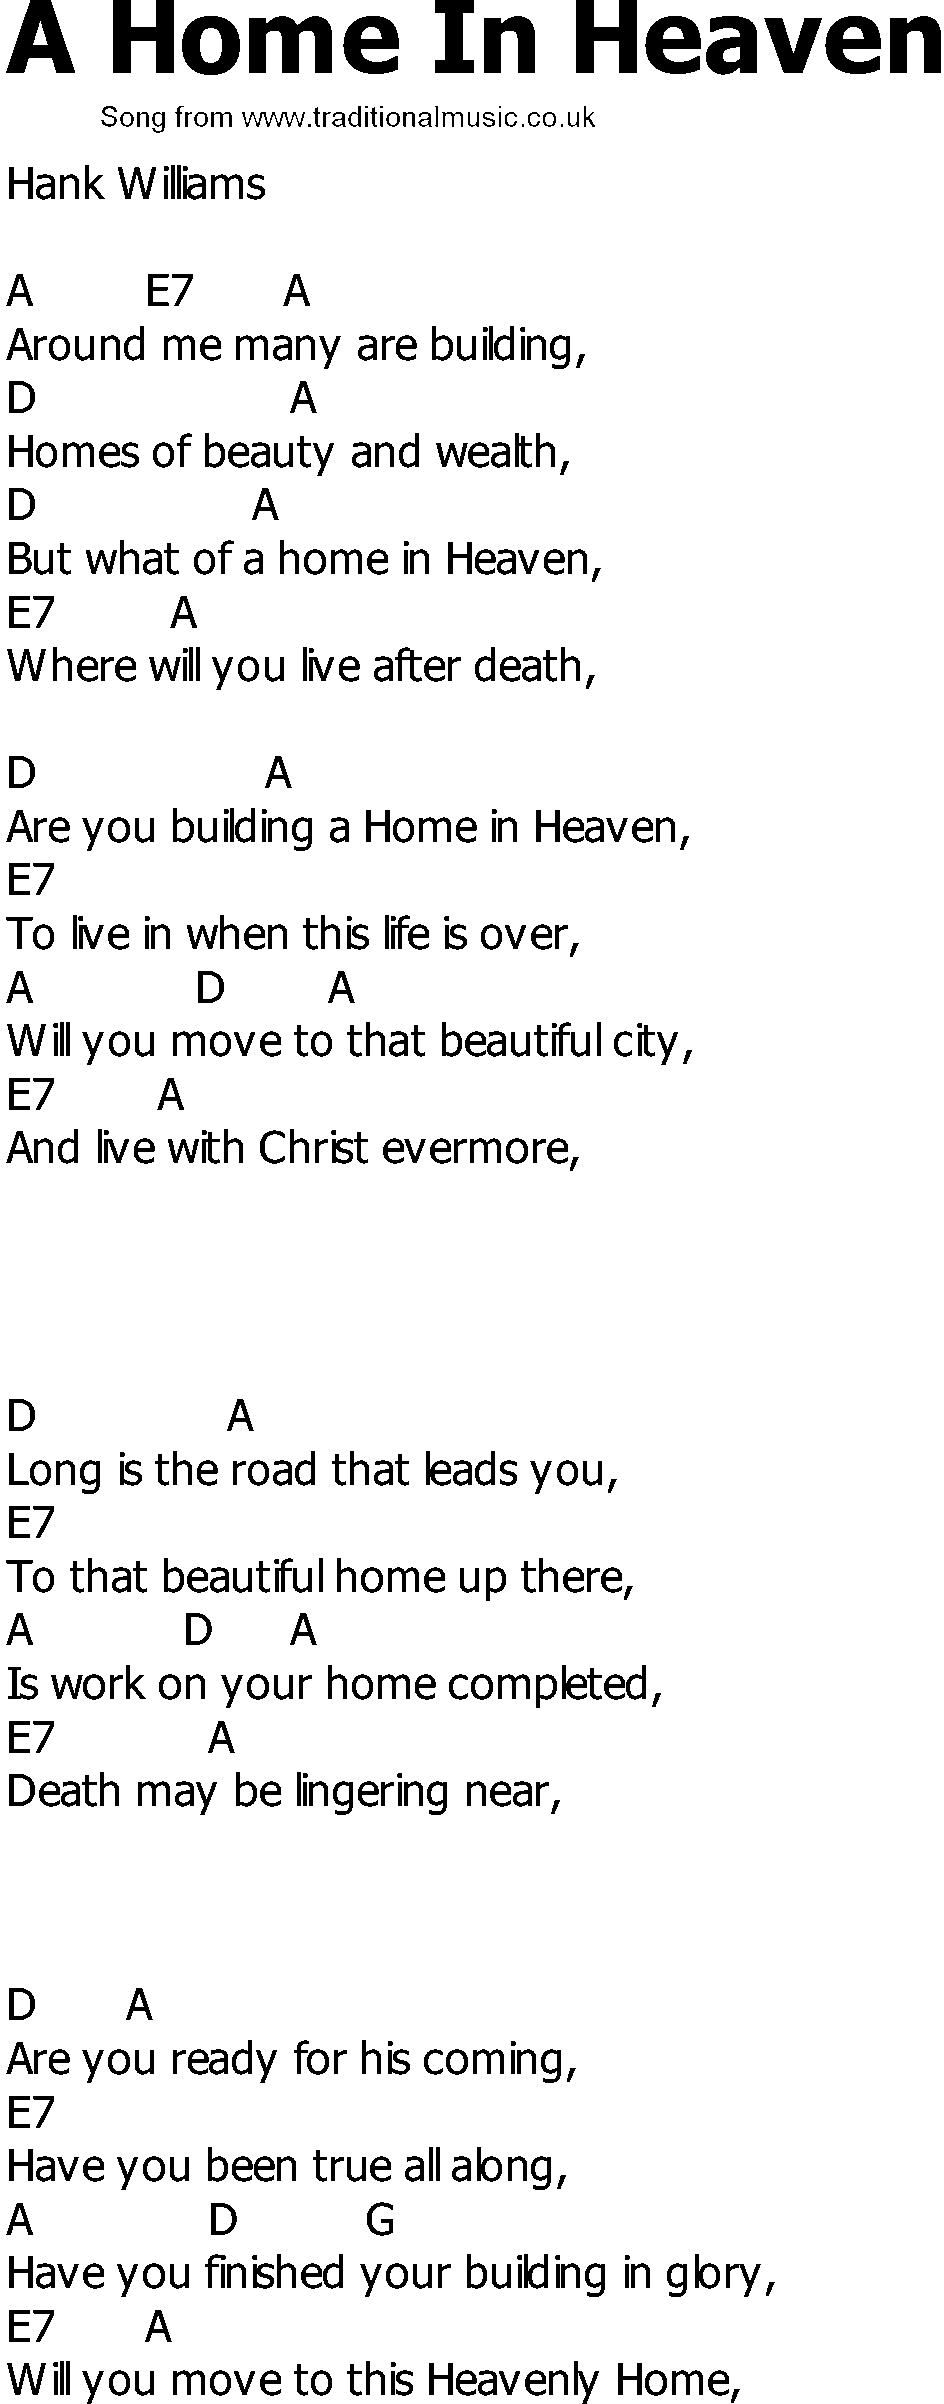 Old Country song lyrics with chords - A Home In Heaven